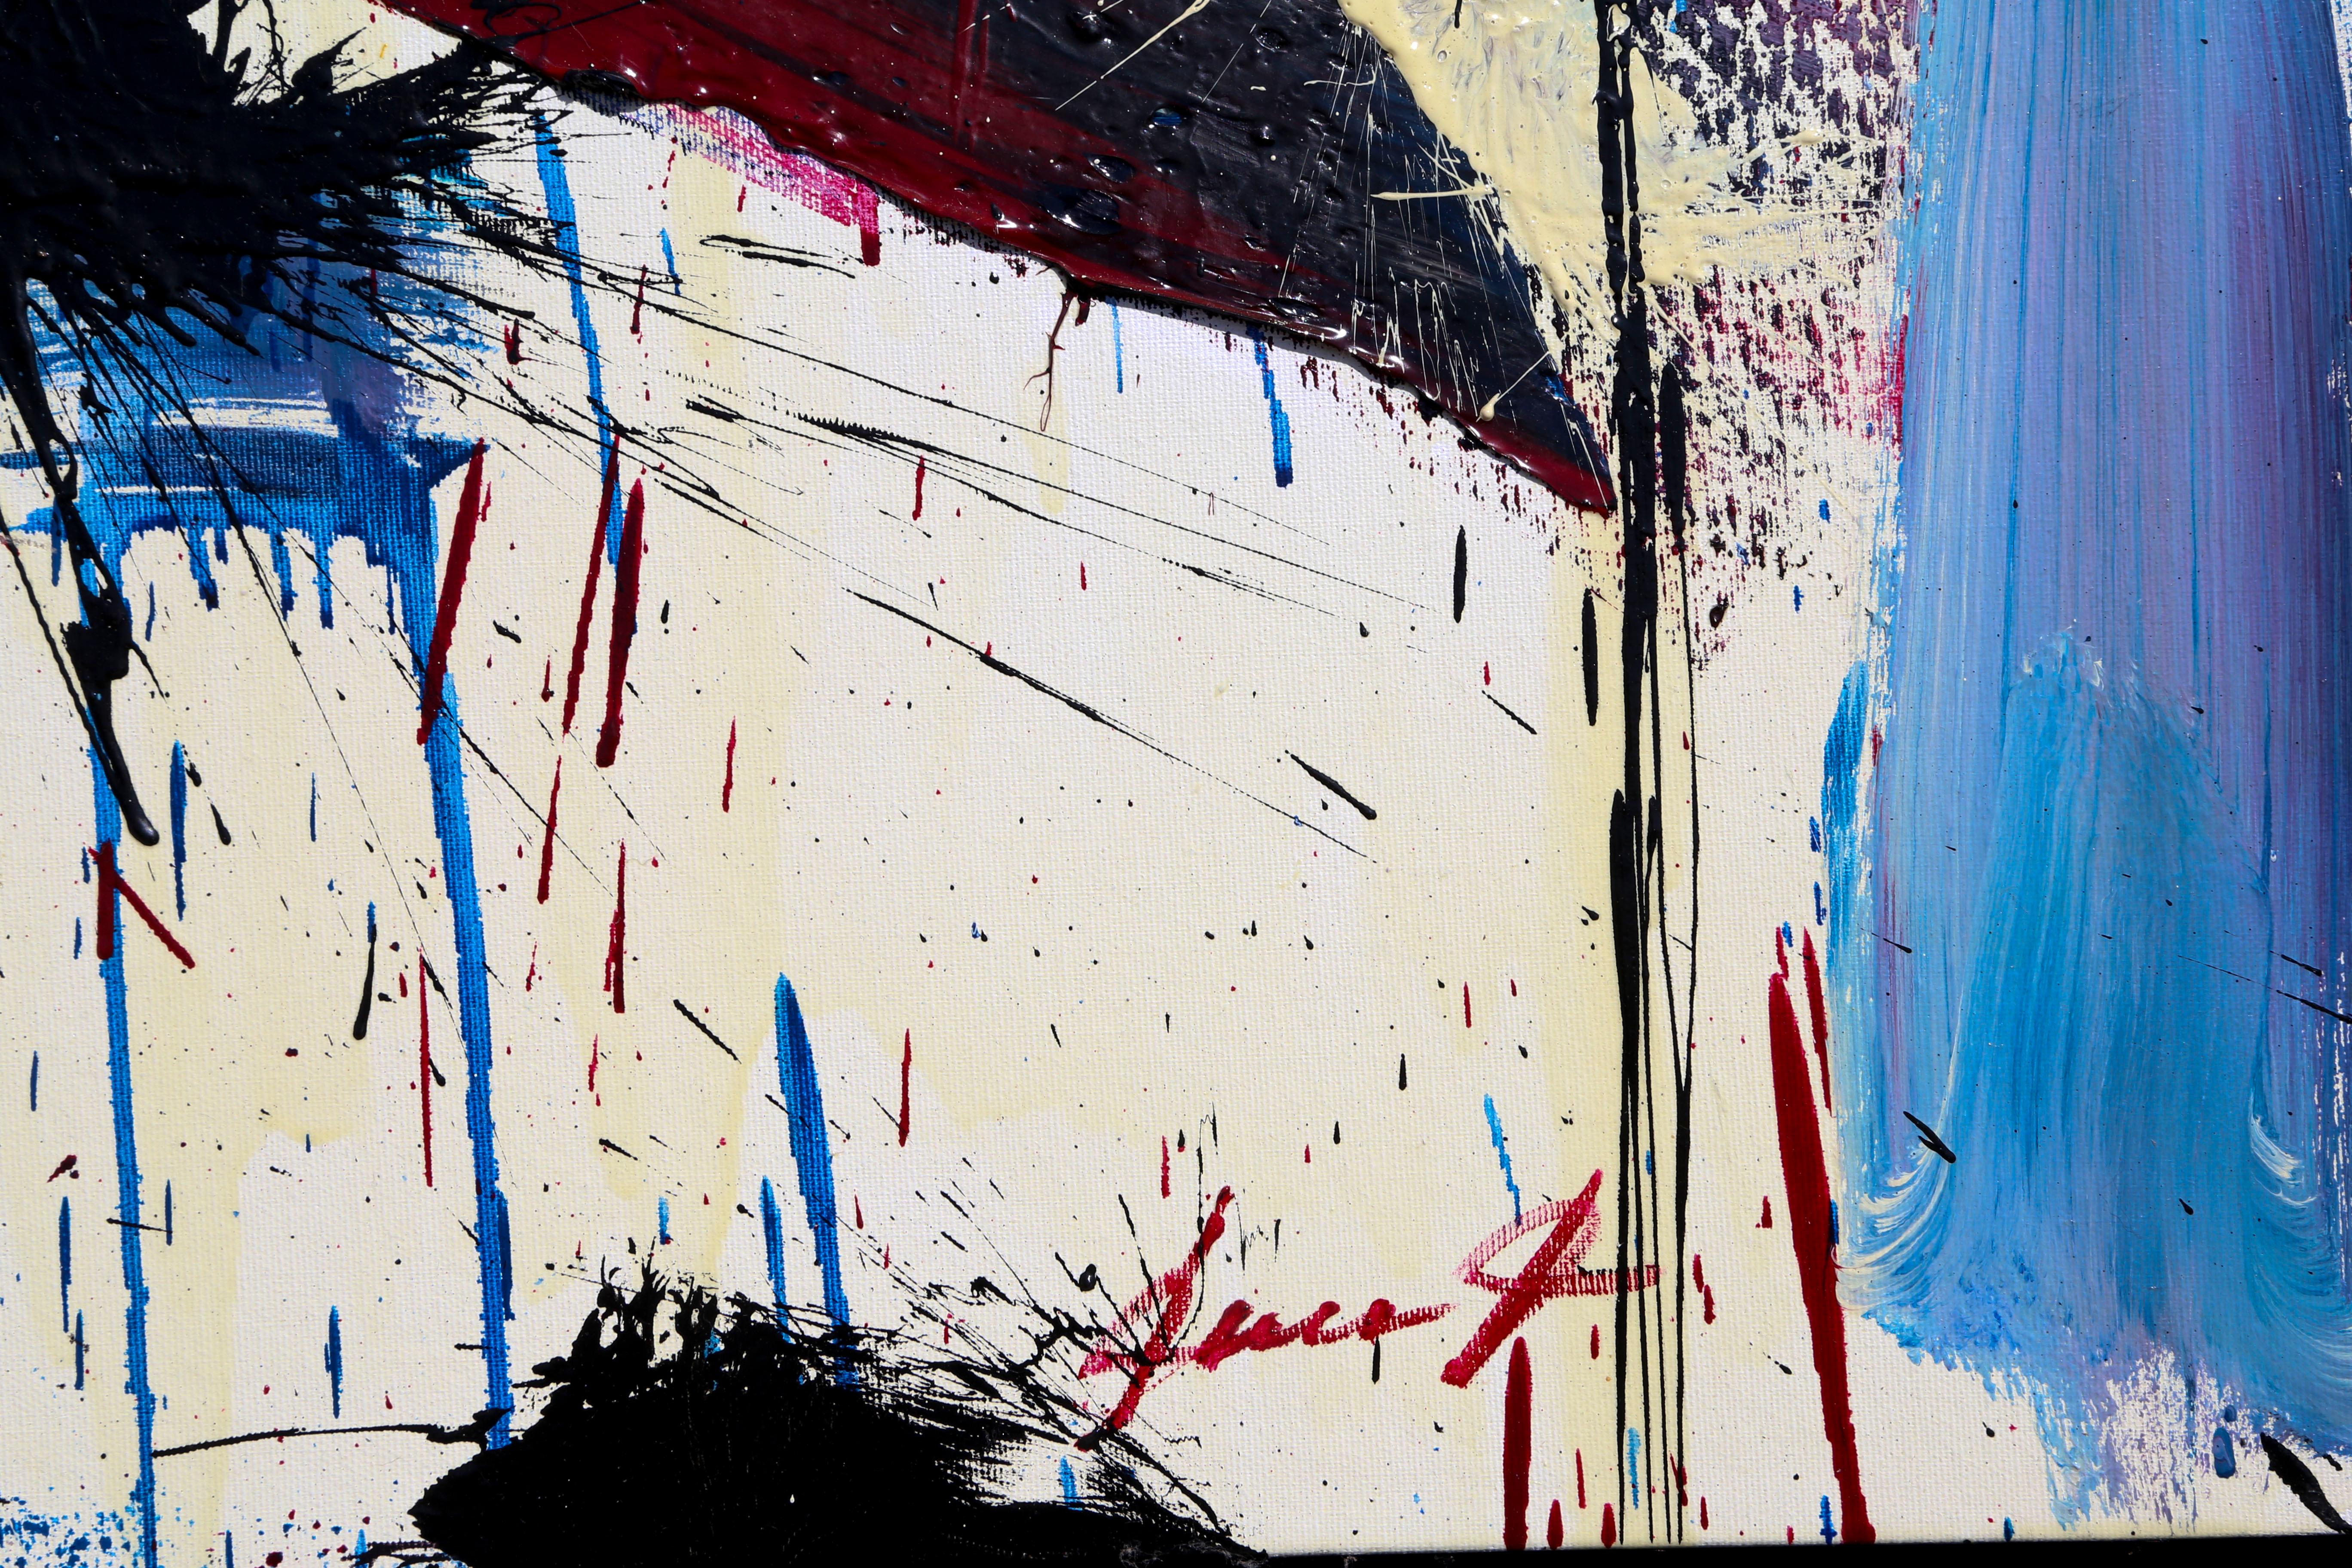 The title of this large Abstract Expressionist painting by Italian artist Pierluigi De'Lutti translates to 